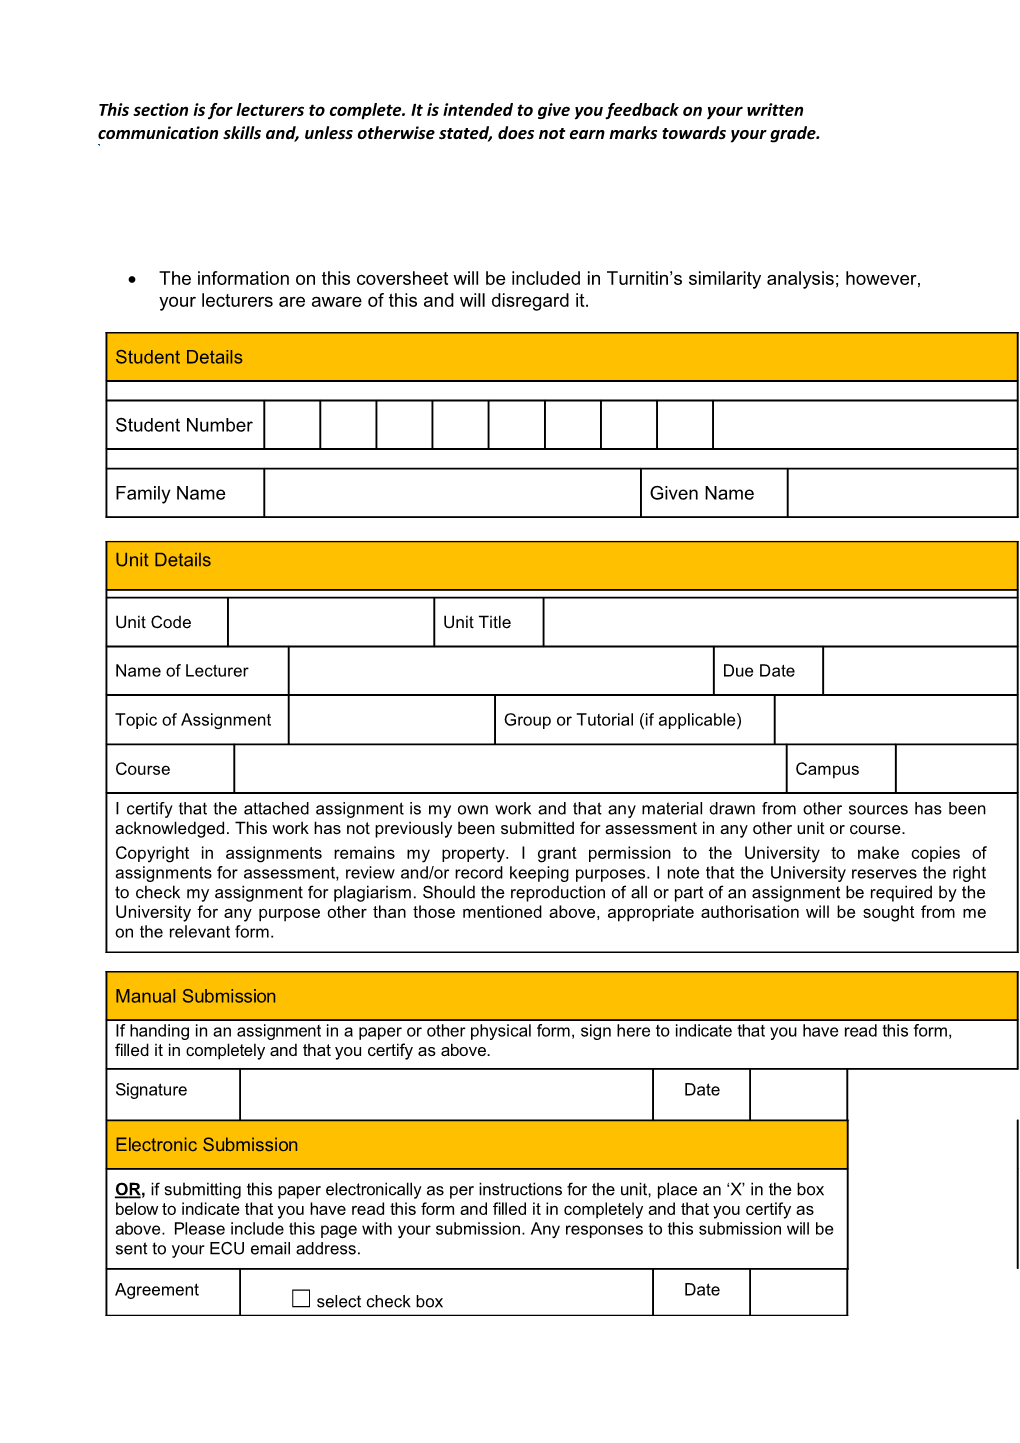 This Section Is for Lecturers to Complete. It Is Intended to Give You Feedback on Your